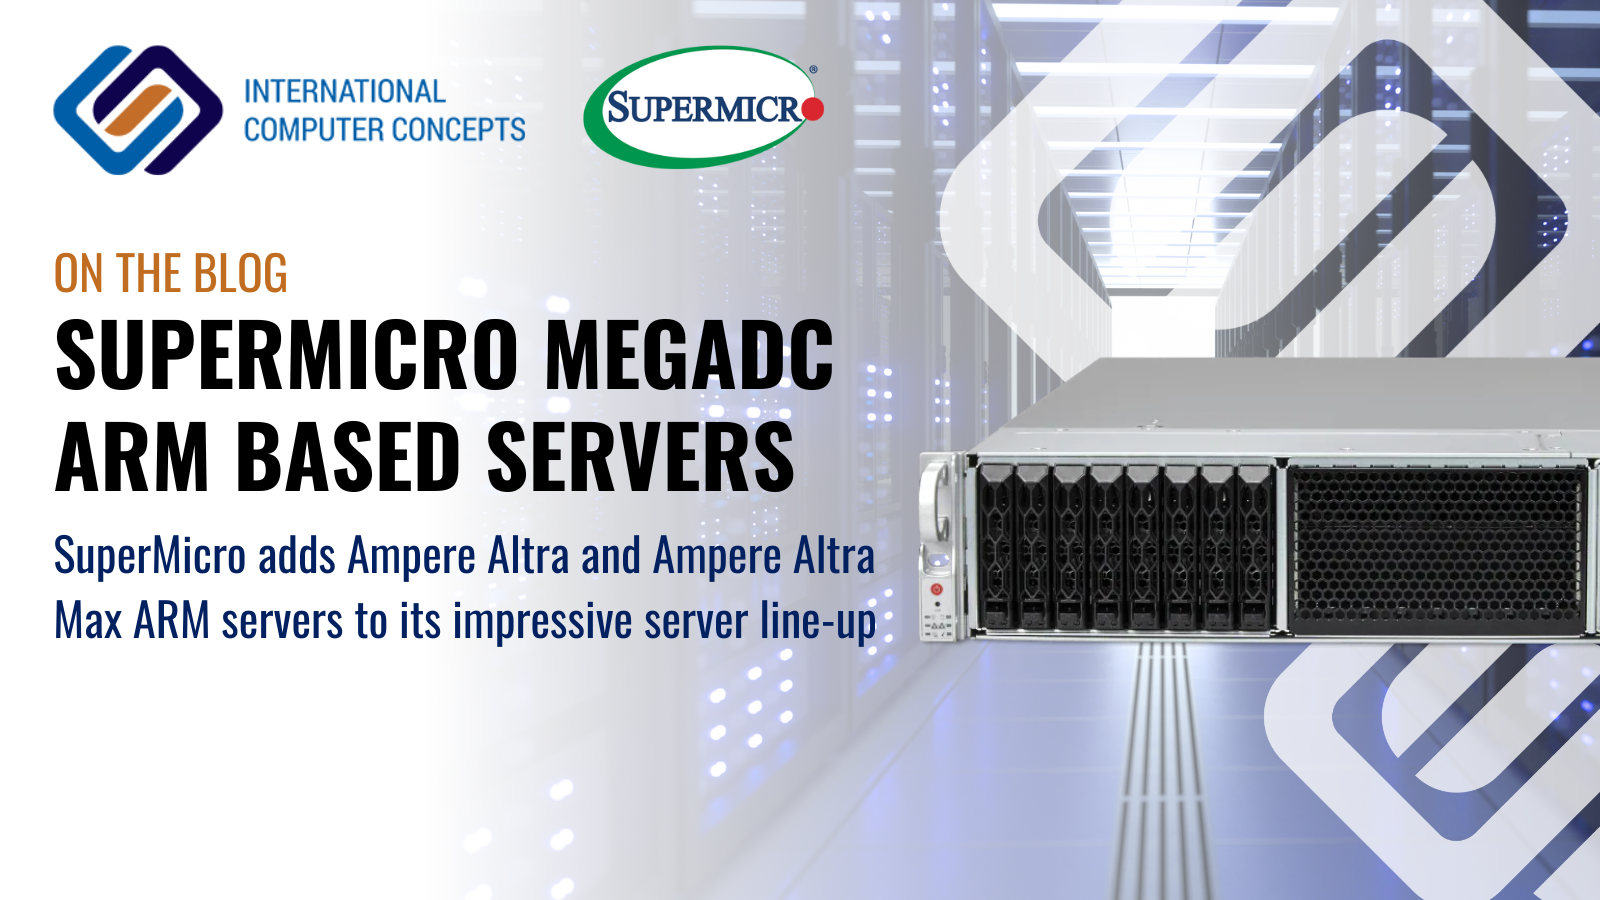 SuperMicro adds Ampere Altra and Ampere Altra Max ARM servers to line-up